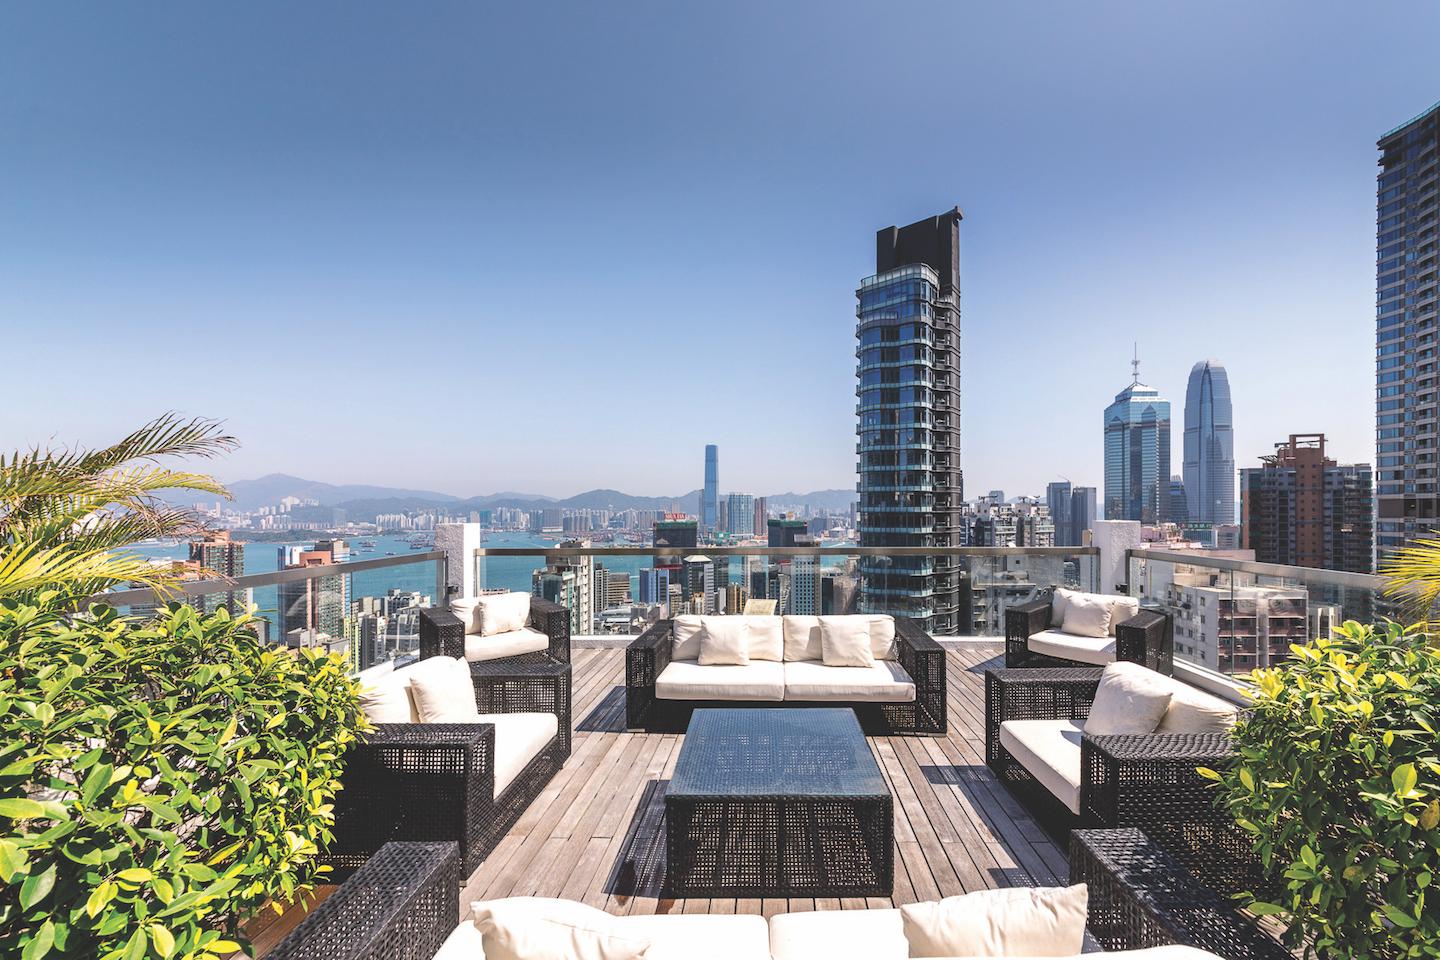 The fully furnished rooftop makes for the perfect venue to entertain family and guests